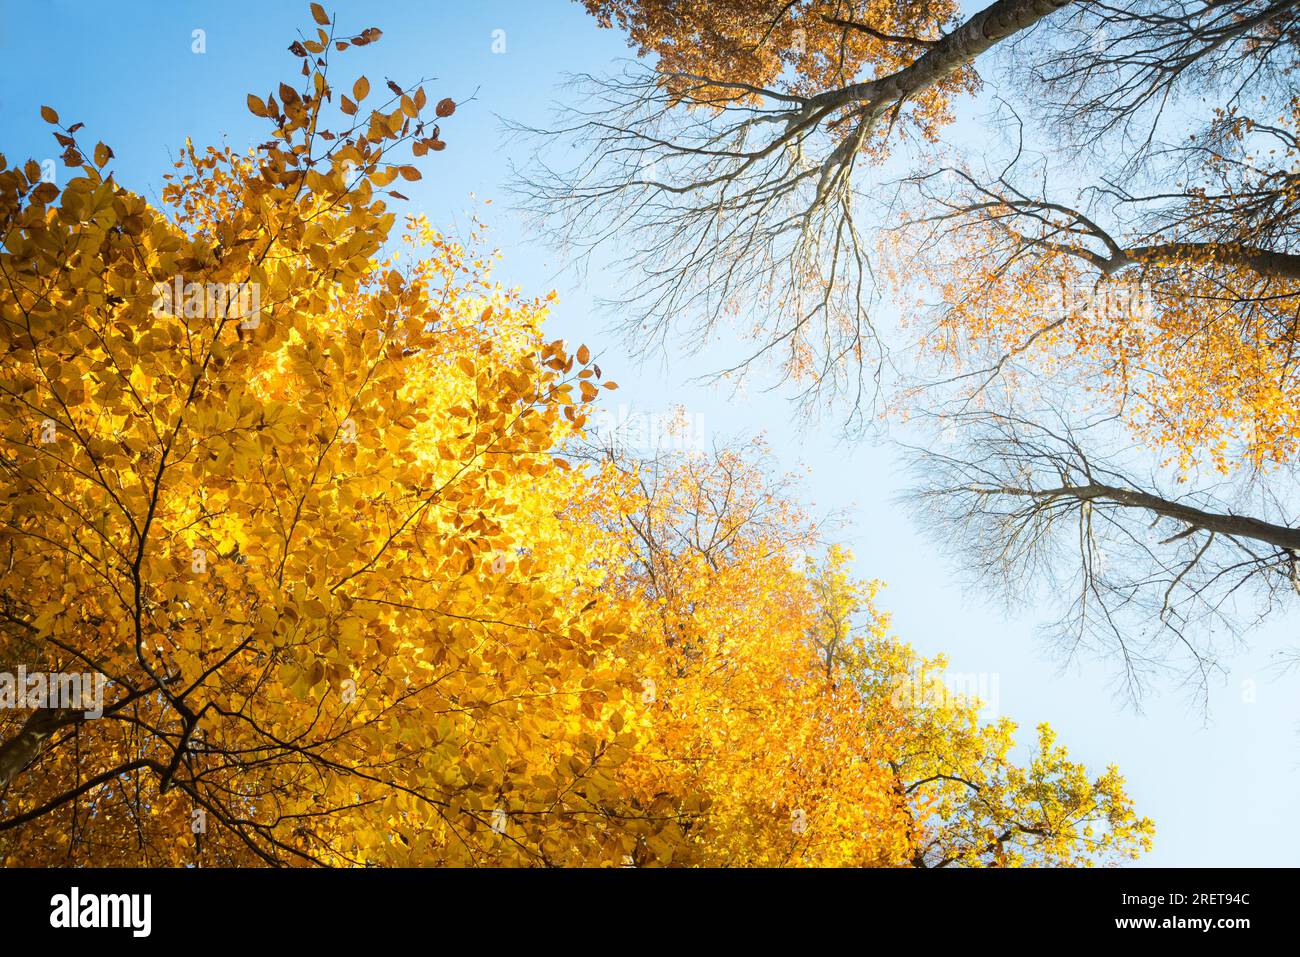 Autumn colorful bright leaves swinging on an oak tree in autumnal park. Fall background. Beautiful nature scene Stock Photo